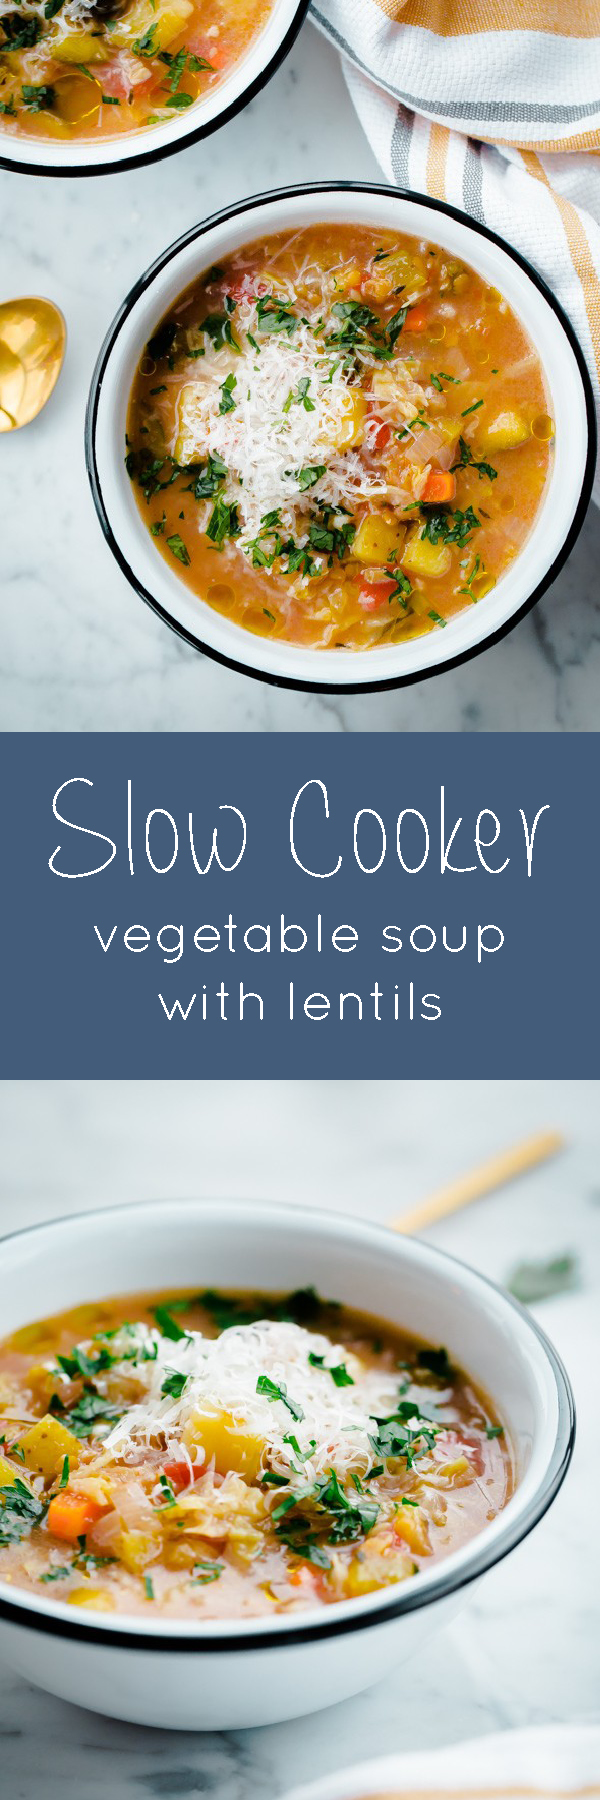 Slow Cooker Winter Minestrone Soup with Red Lentils